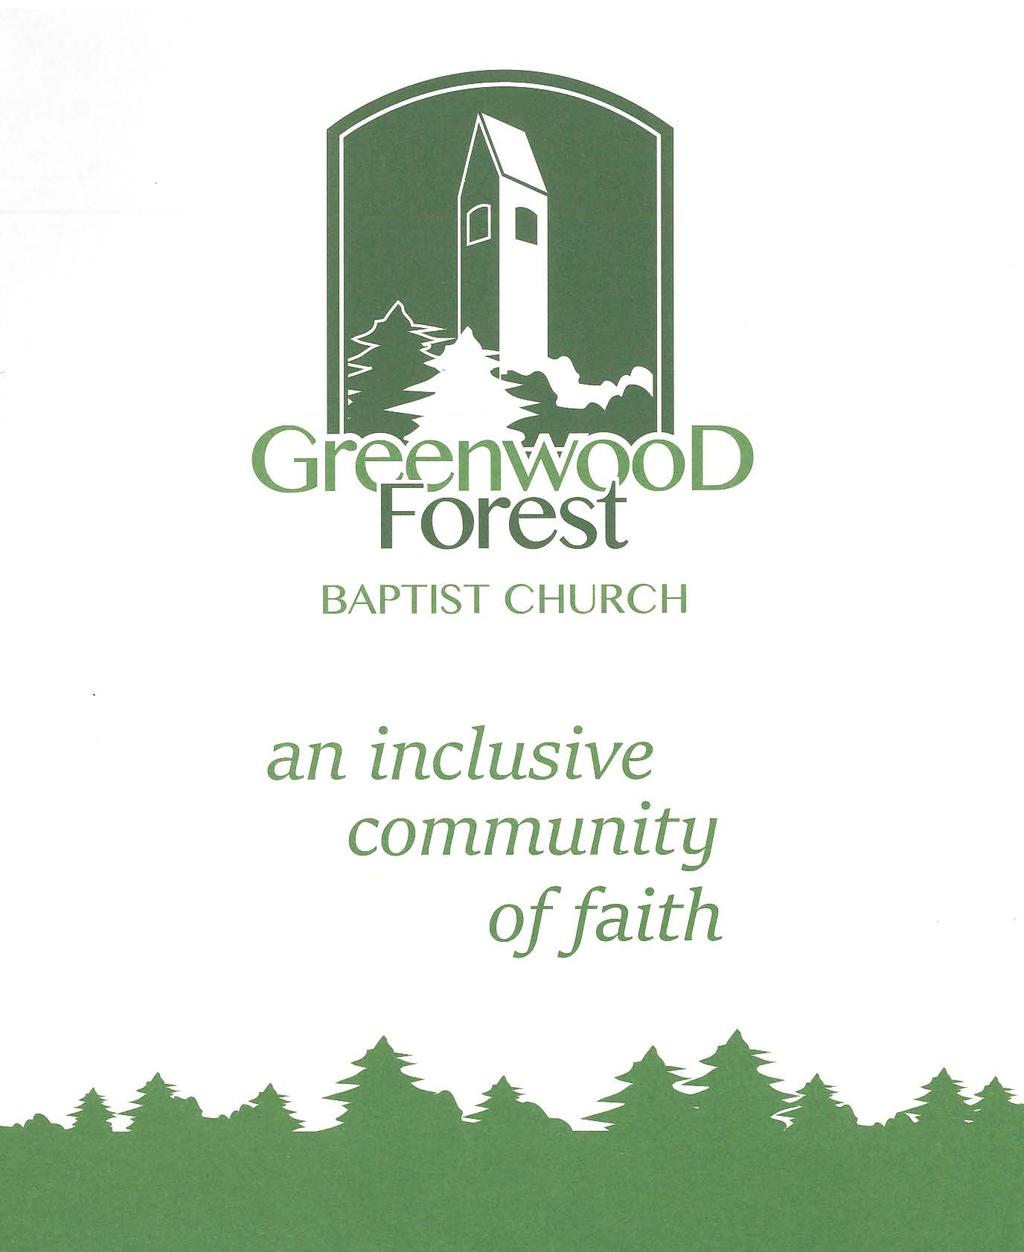 GREENWOOD FOREST BAPTIST CHURCH The Worship of God The Nineteenth Sunday After Pentecost September 30, 2018 Chiming of the Hour Gathering Hymn 490 (v.